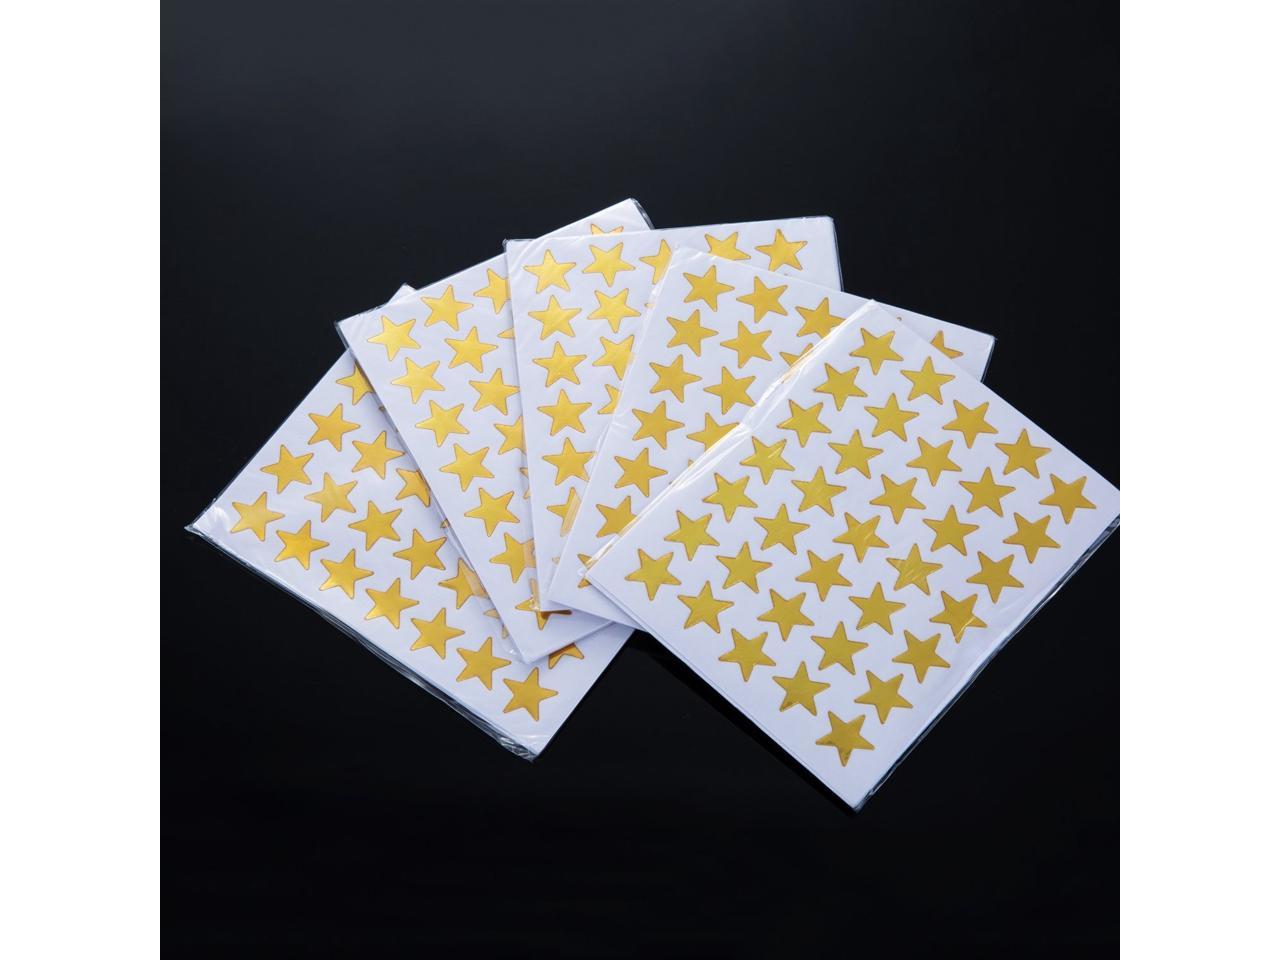 eBoot Star Stickers 1750 Count Self-Adhesive Stickers Stars Gold 